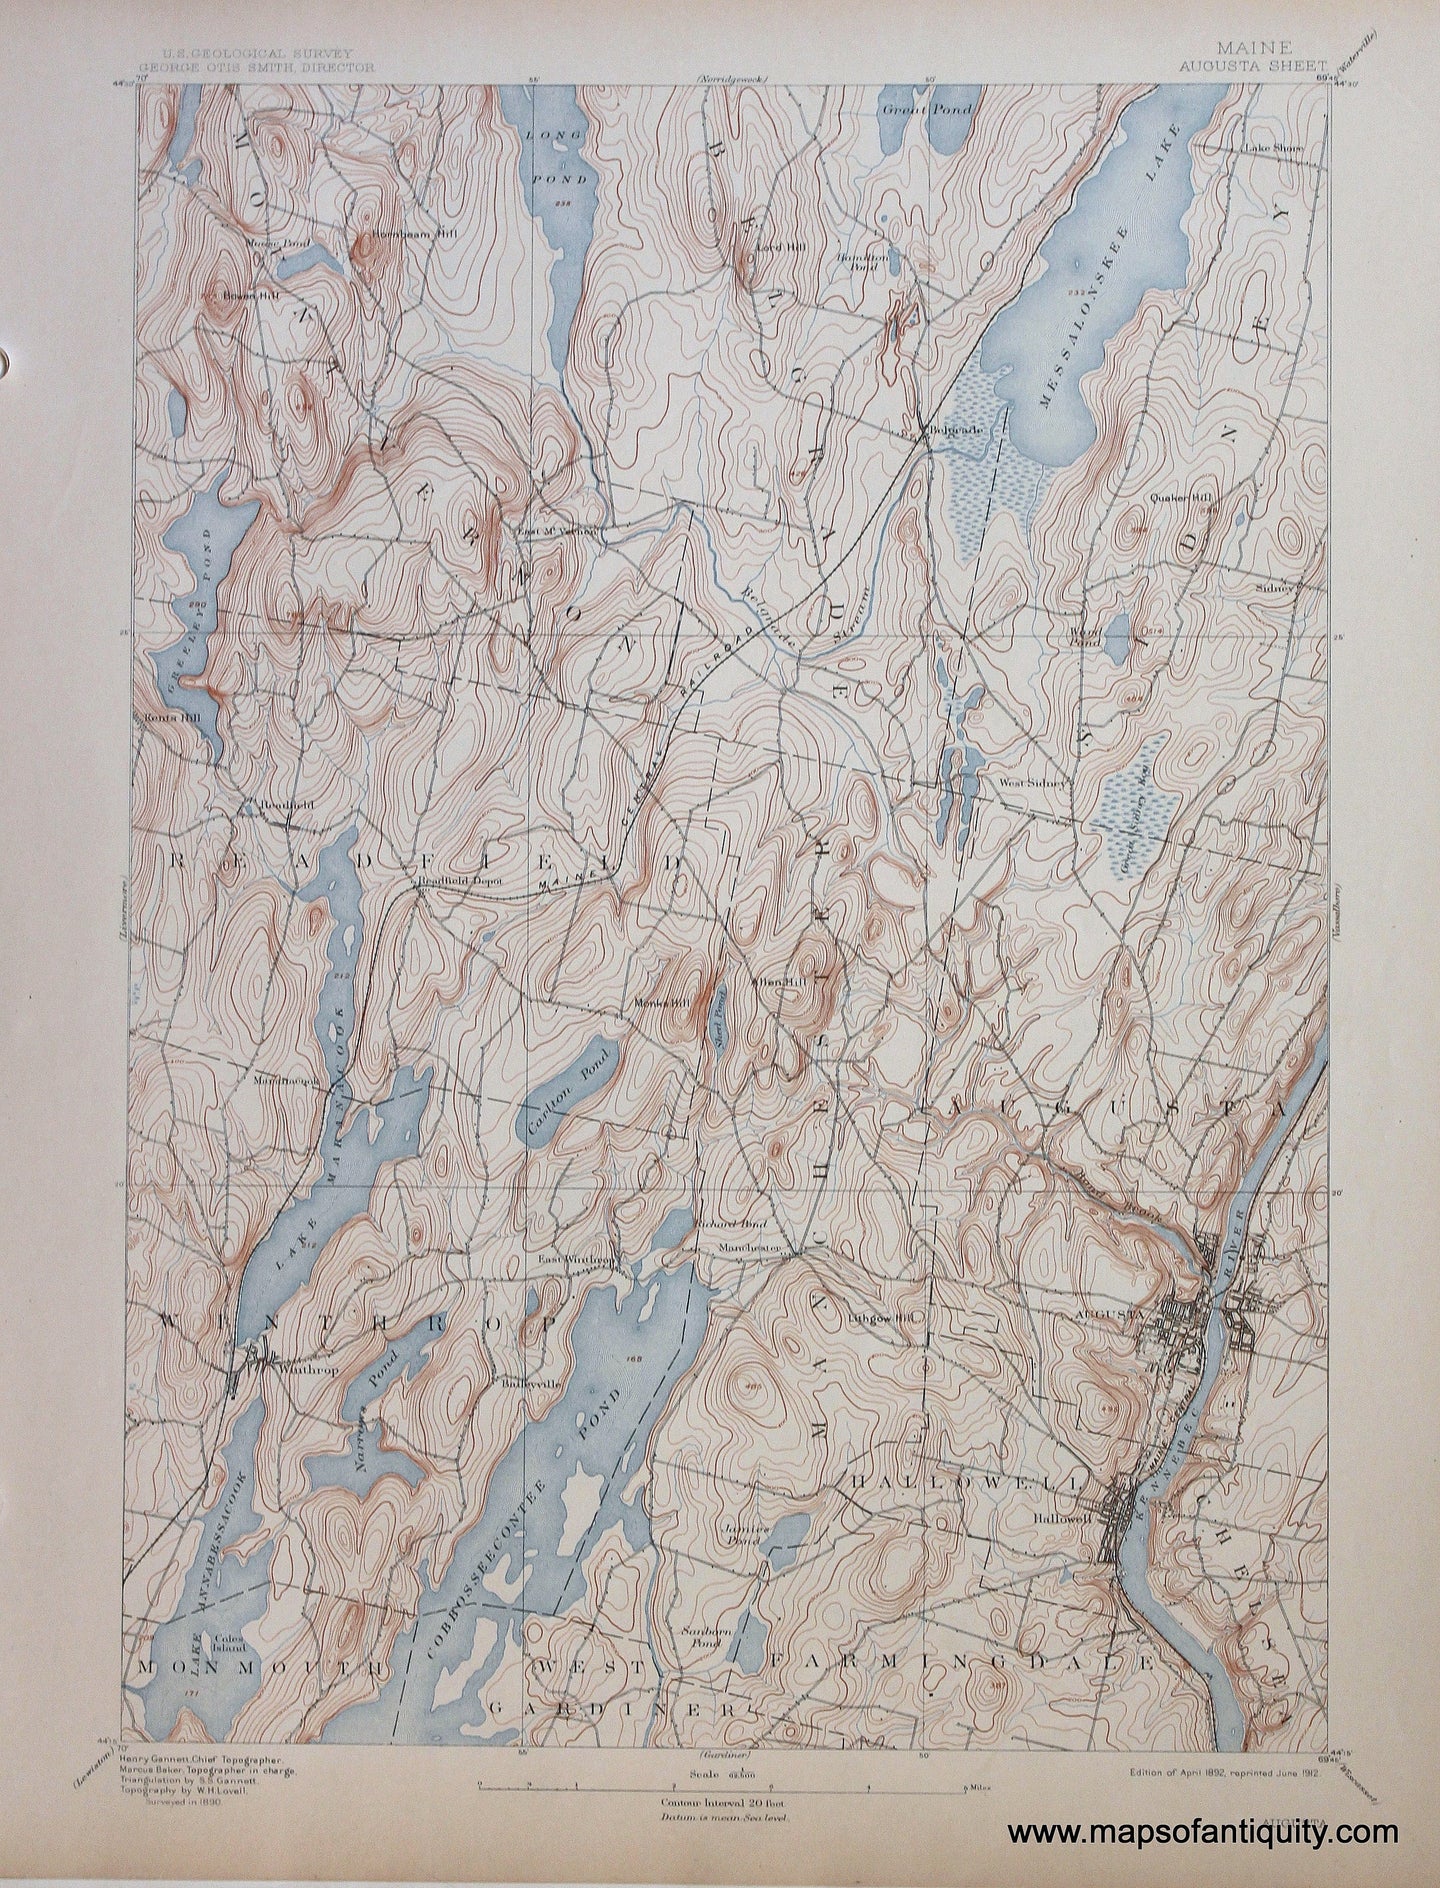 Genuine-Antique-Map-Augusta-Maine--1912-US-Geological-Survey--Maps-Of-Antiquity